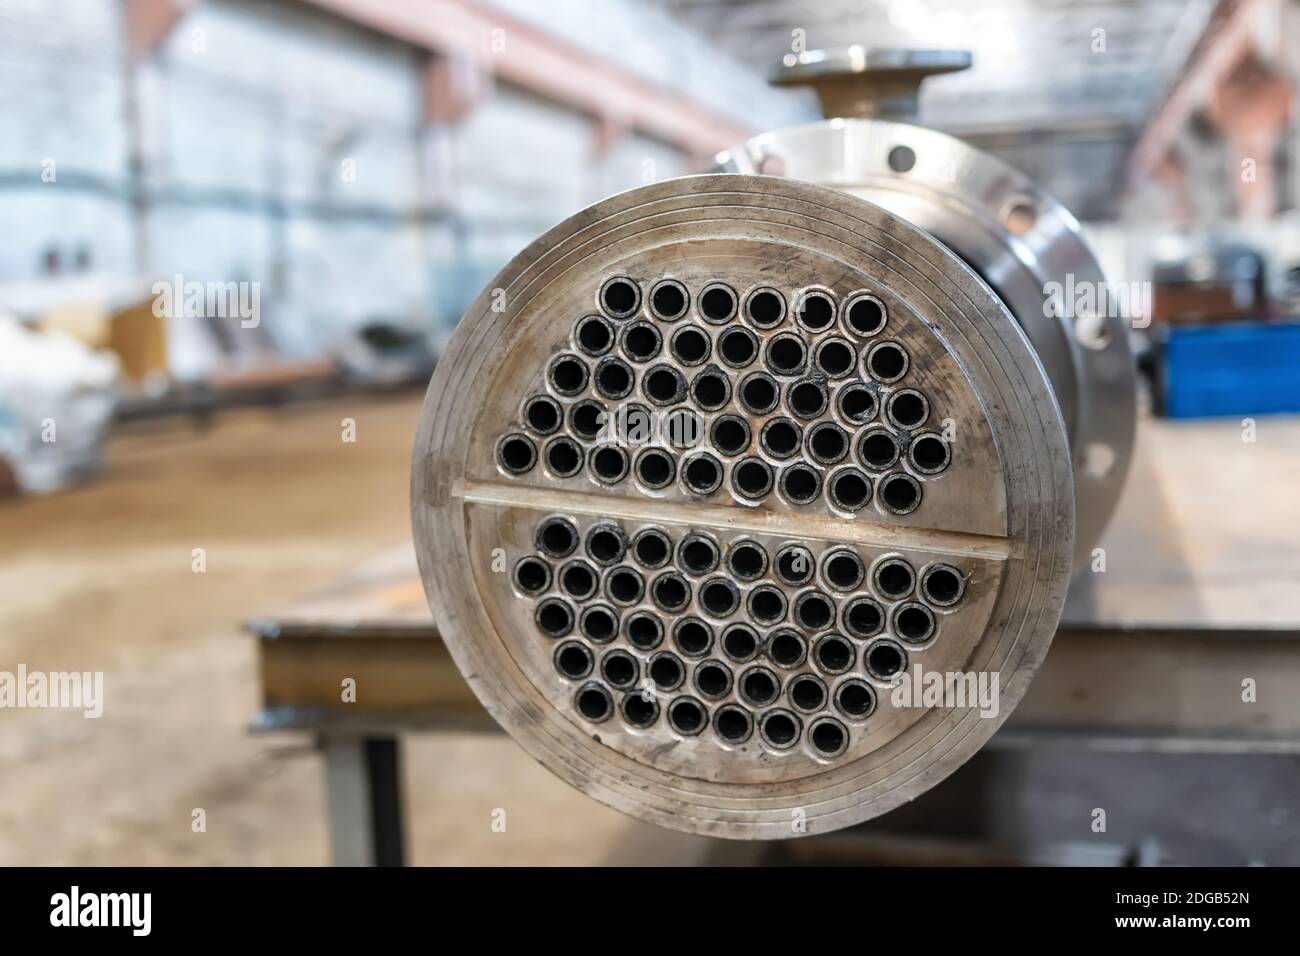 Manufacture of a new heat exchanger with tube bundle Stock Photo